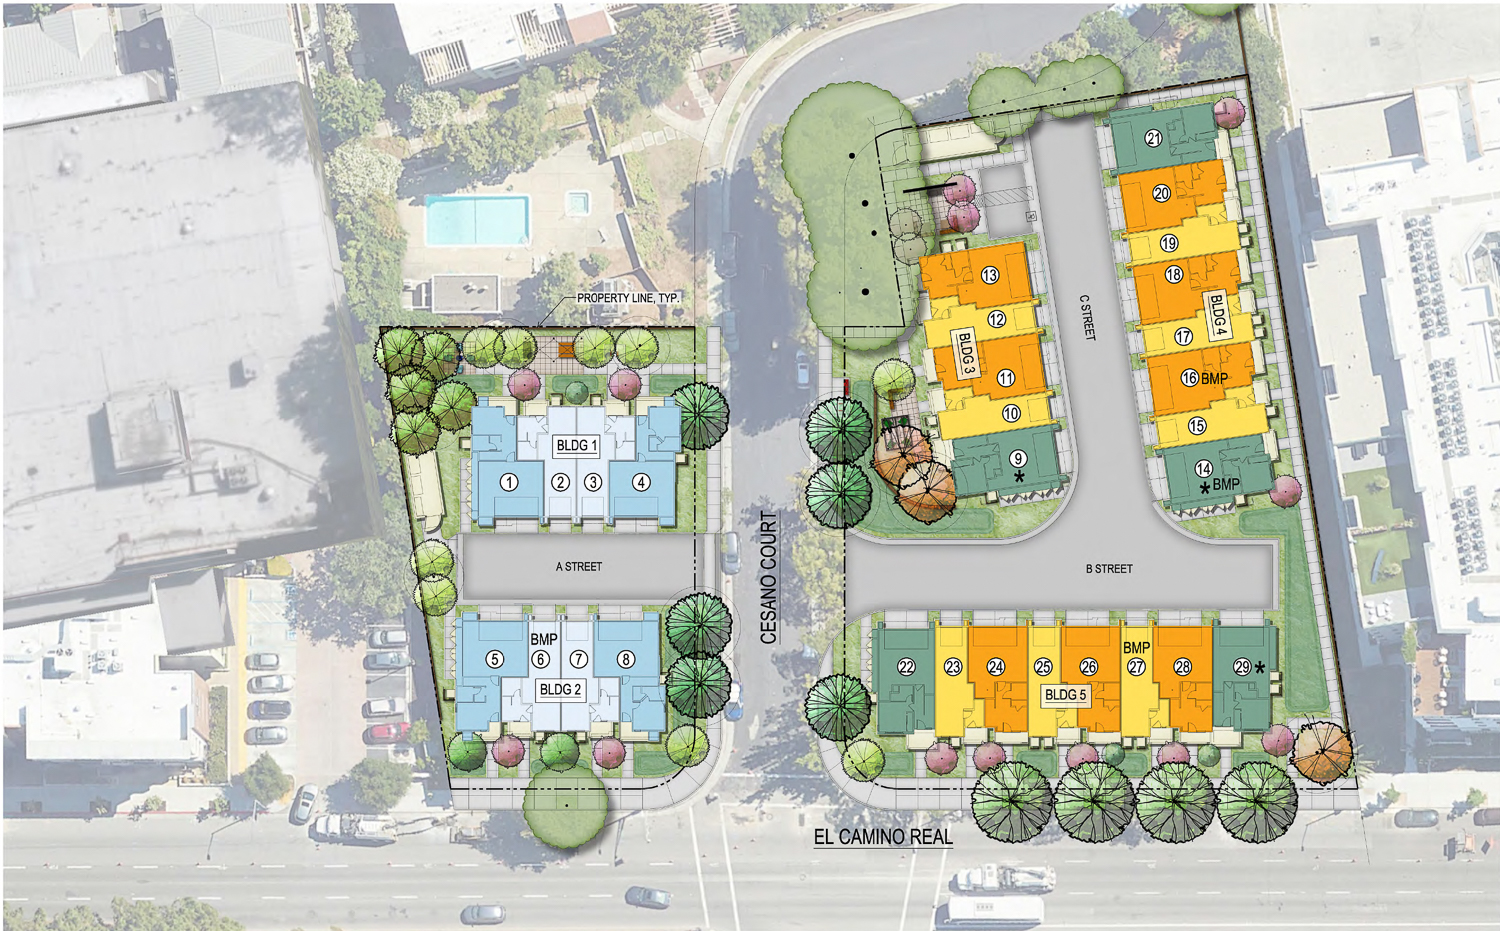 4345 El Camino Real site map, illustration by SDG Architects